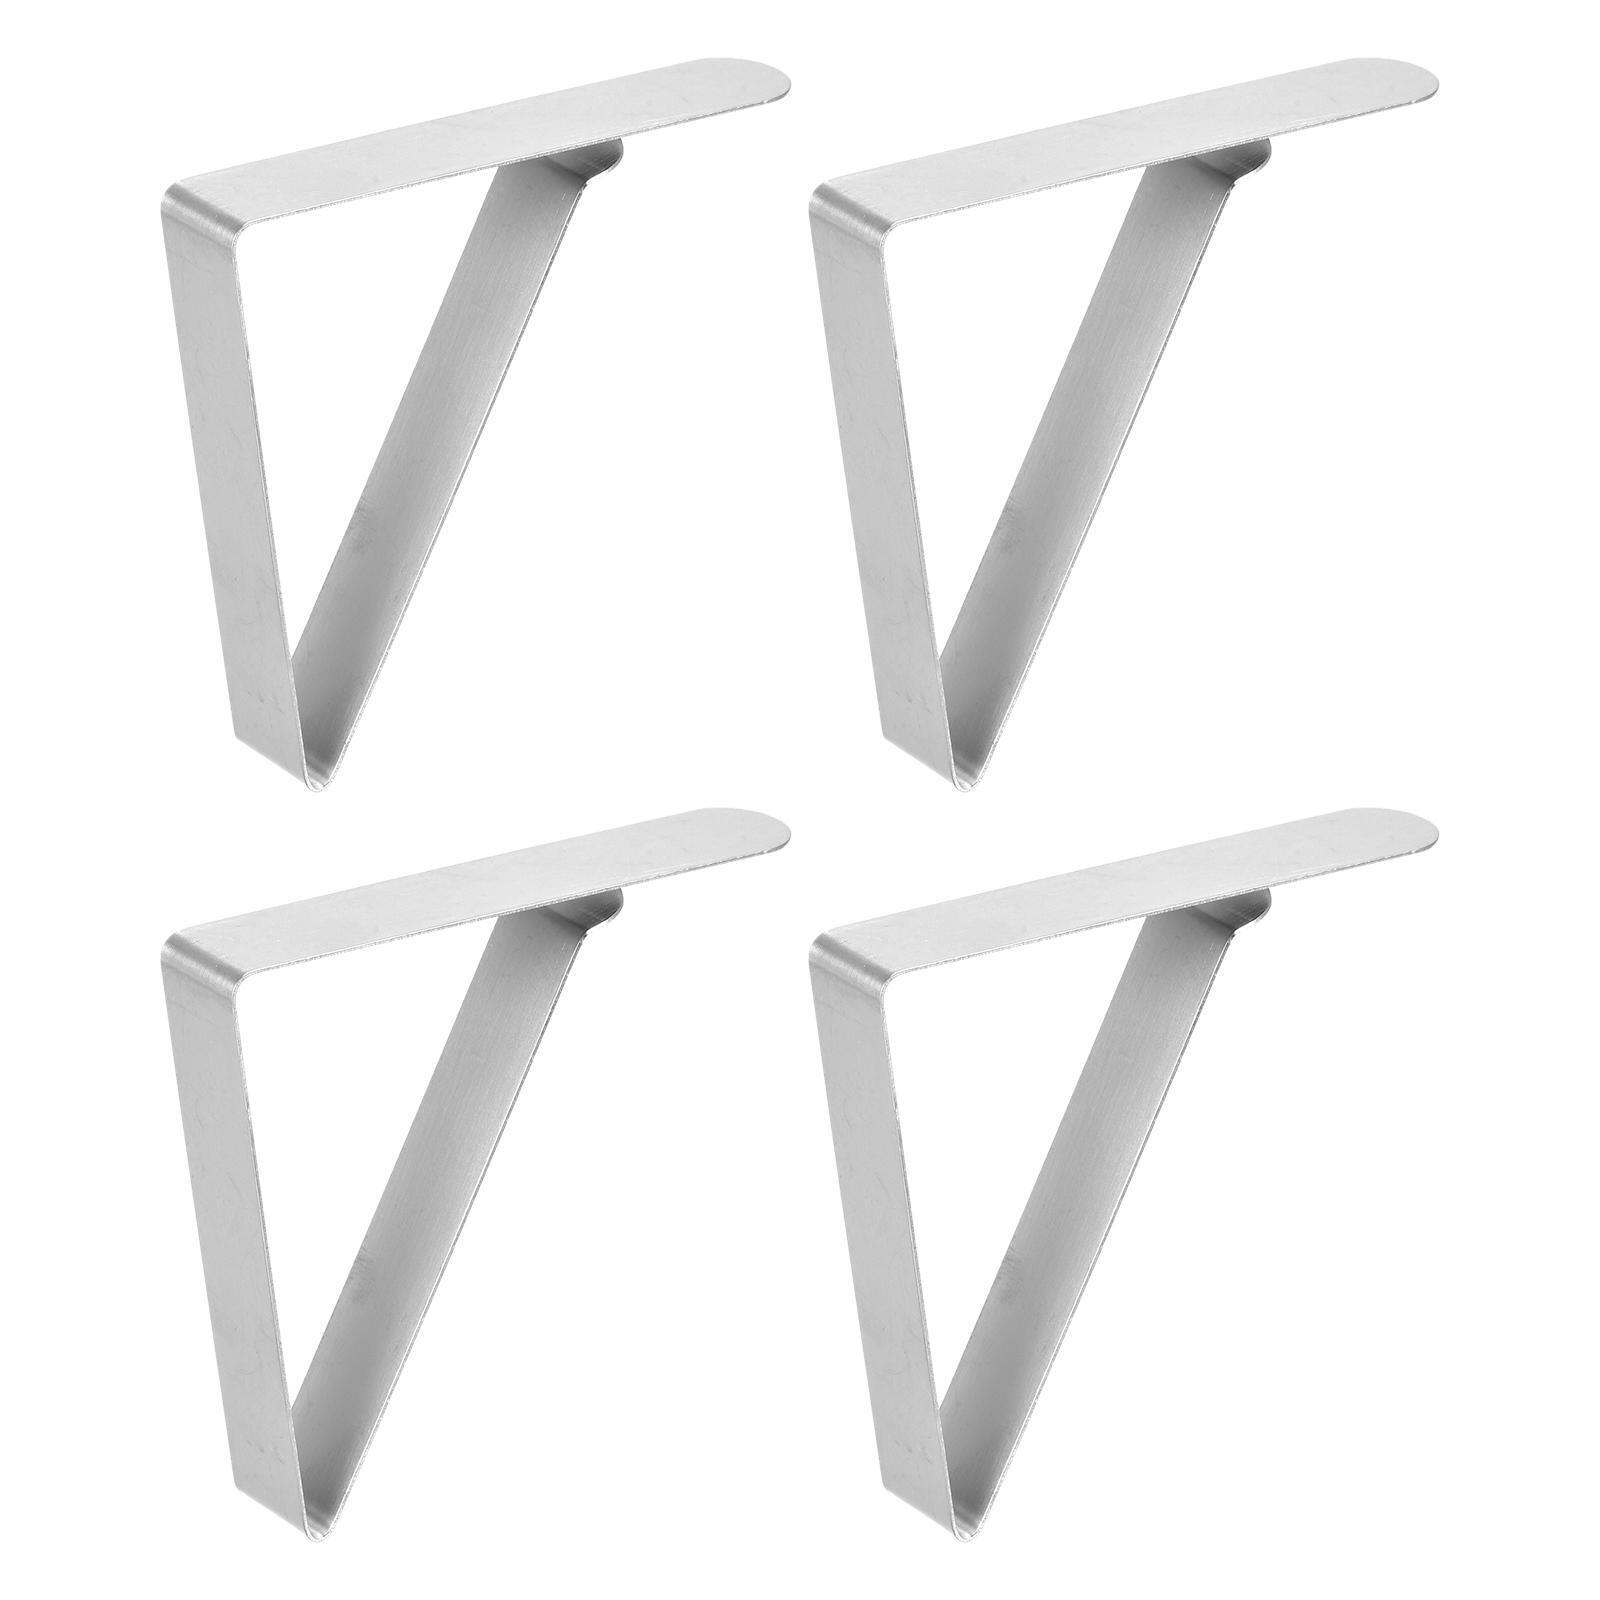 Tablecloth Clips 83mm X 73mm 430 Stainless Steel Table Cloth Holder Silver 12pcs